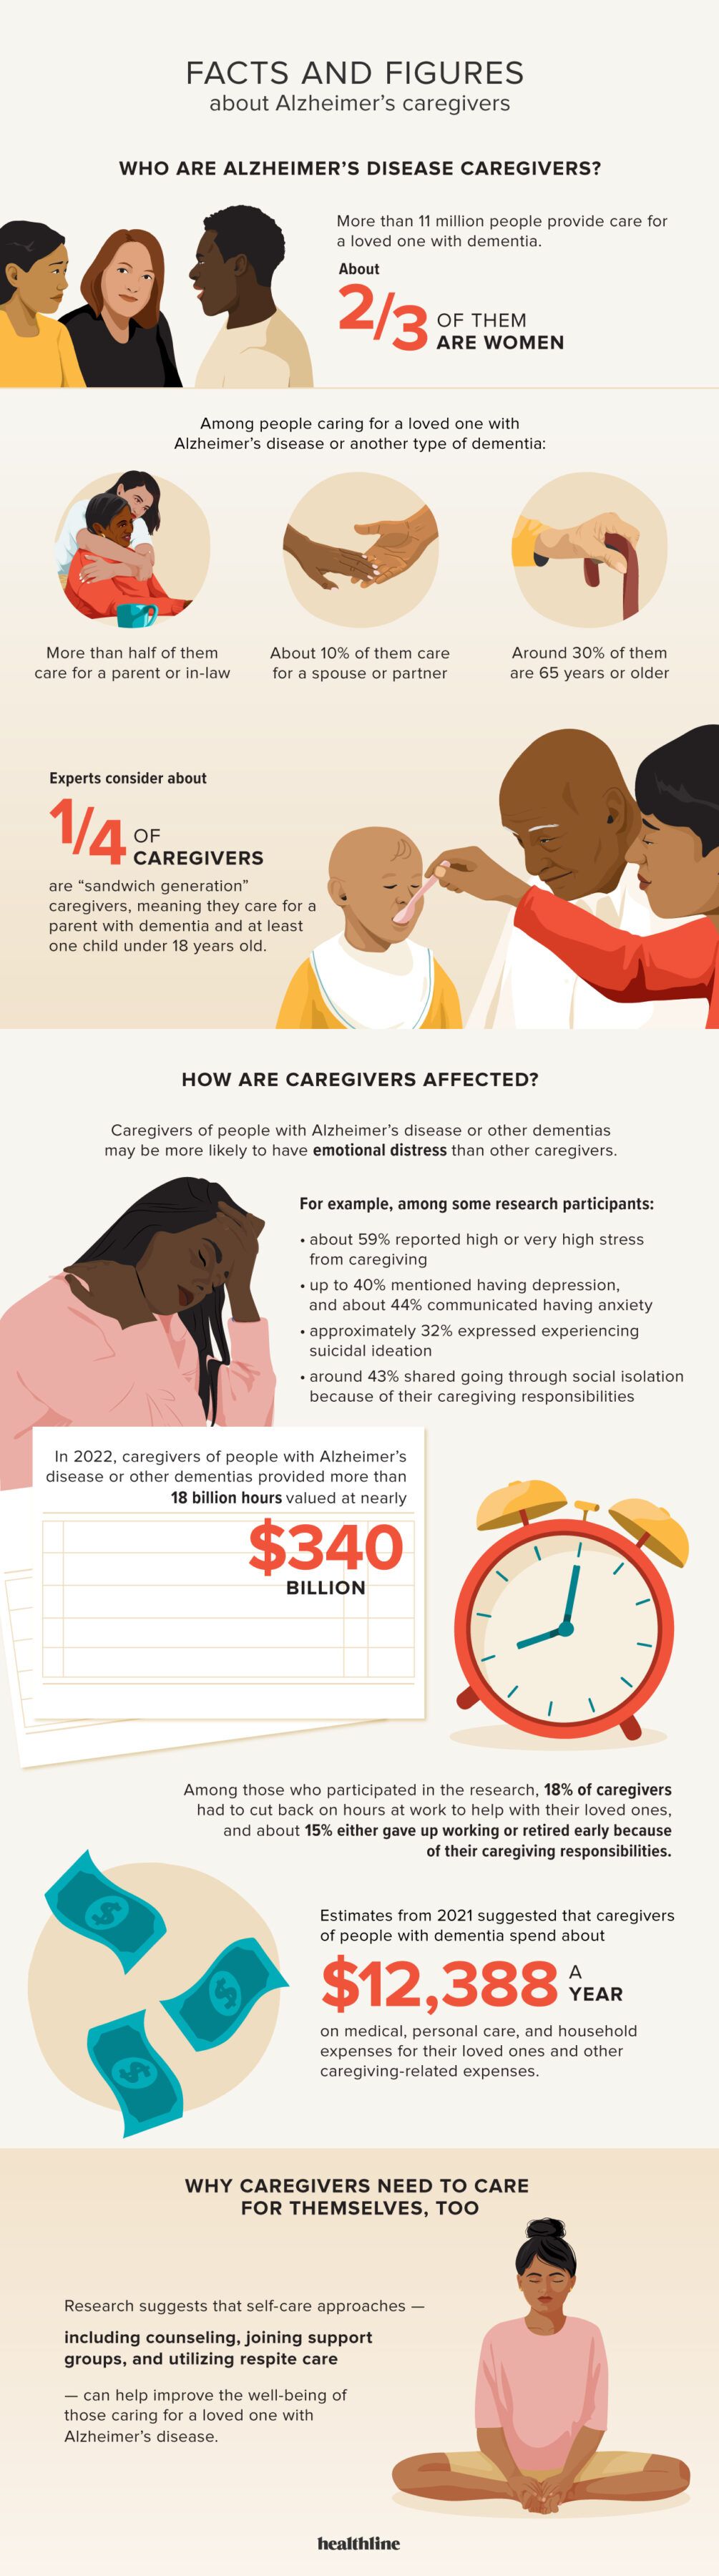 infographic with facts about Alzheimer's caregivers